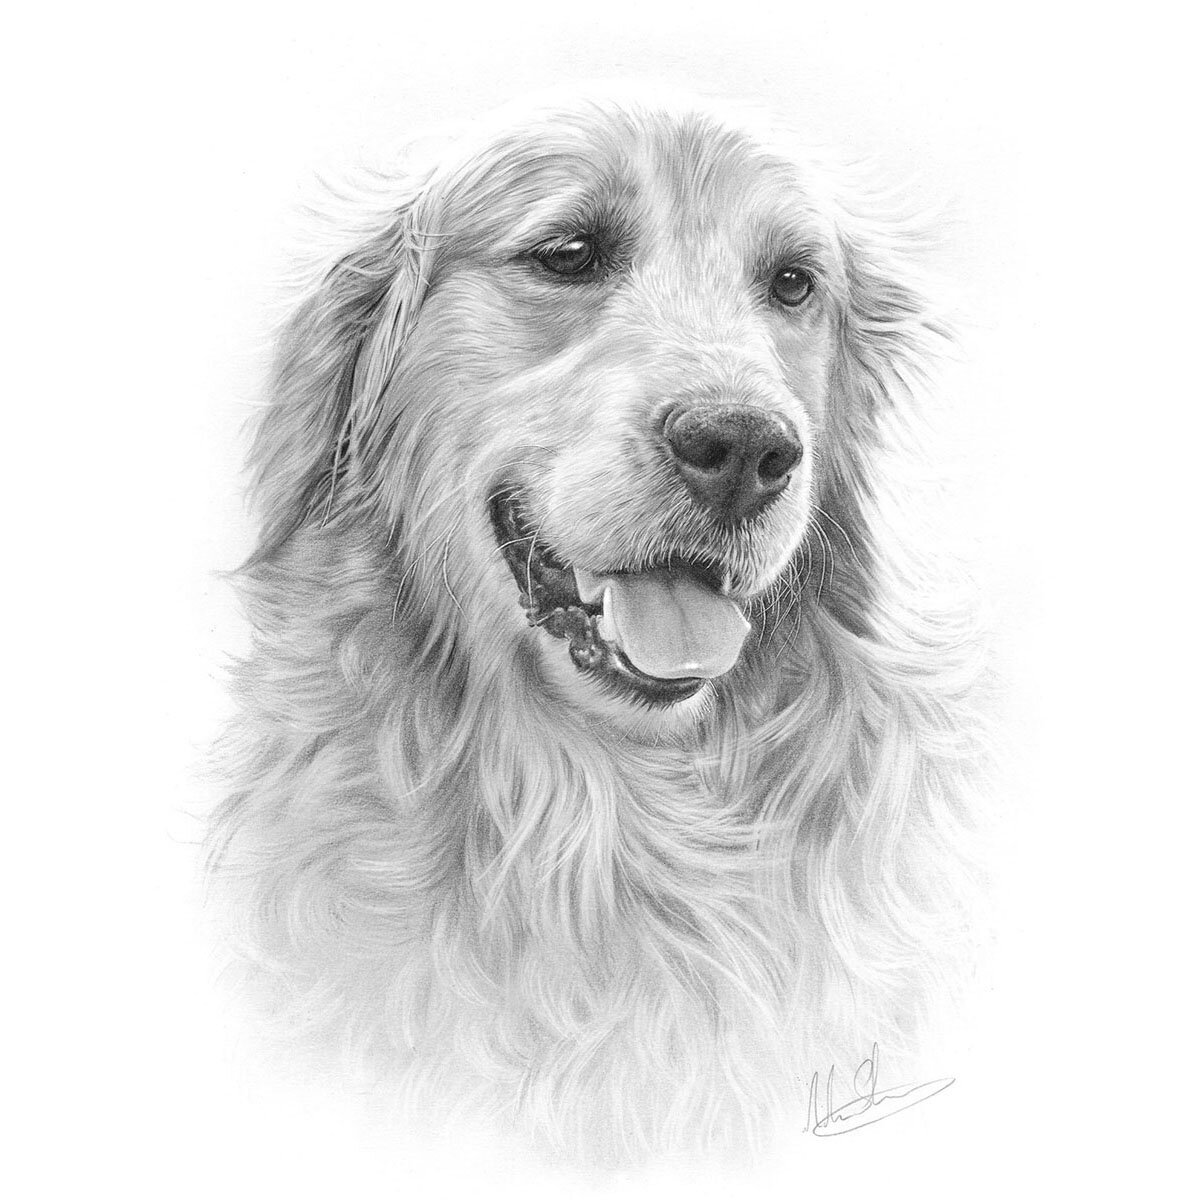 Discover Art with Sandra - Art Workshops to Go - How to Draw Dogs -  Complicated Fur Golden Retriever (updated) on Vimeo